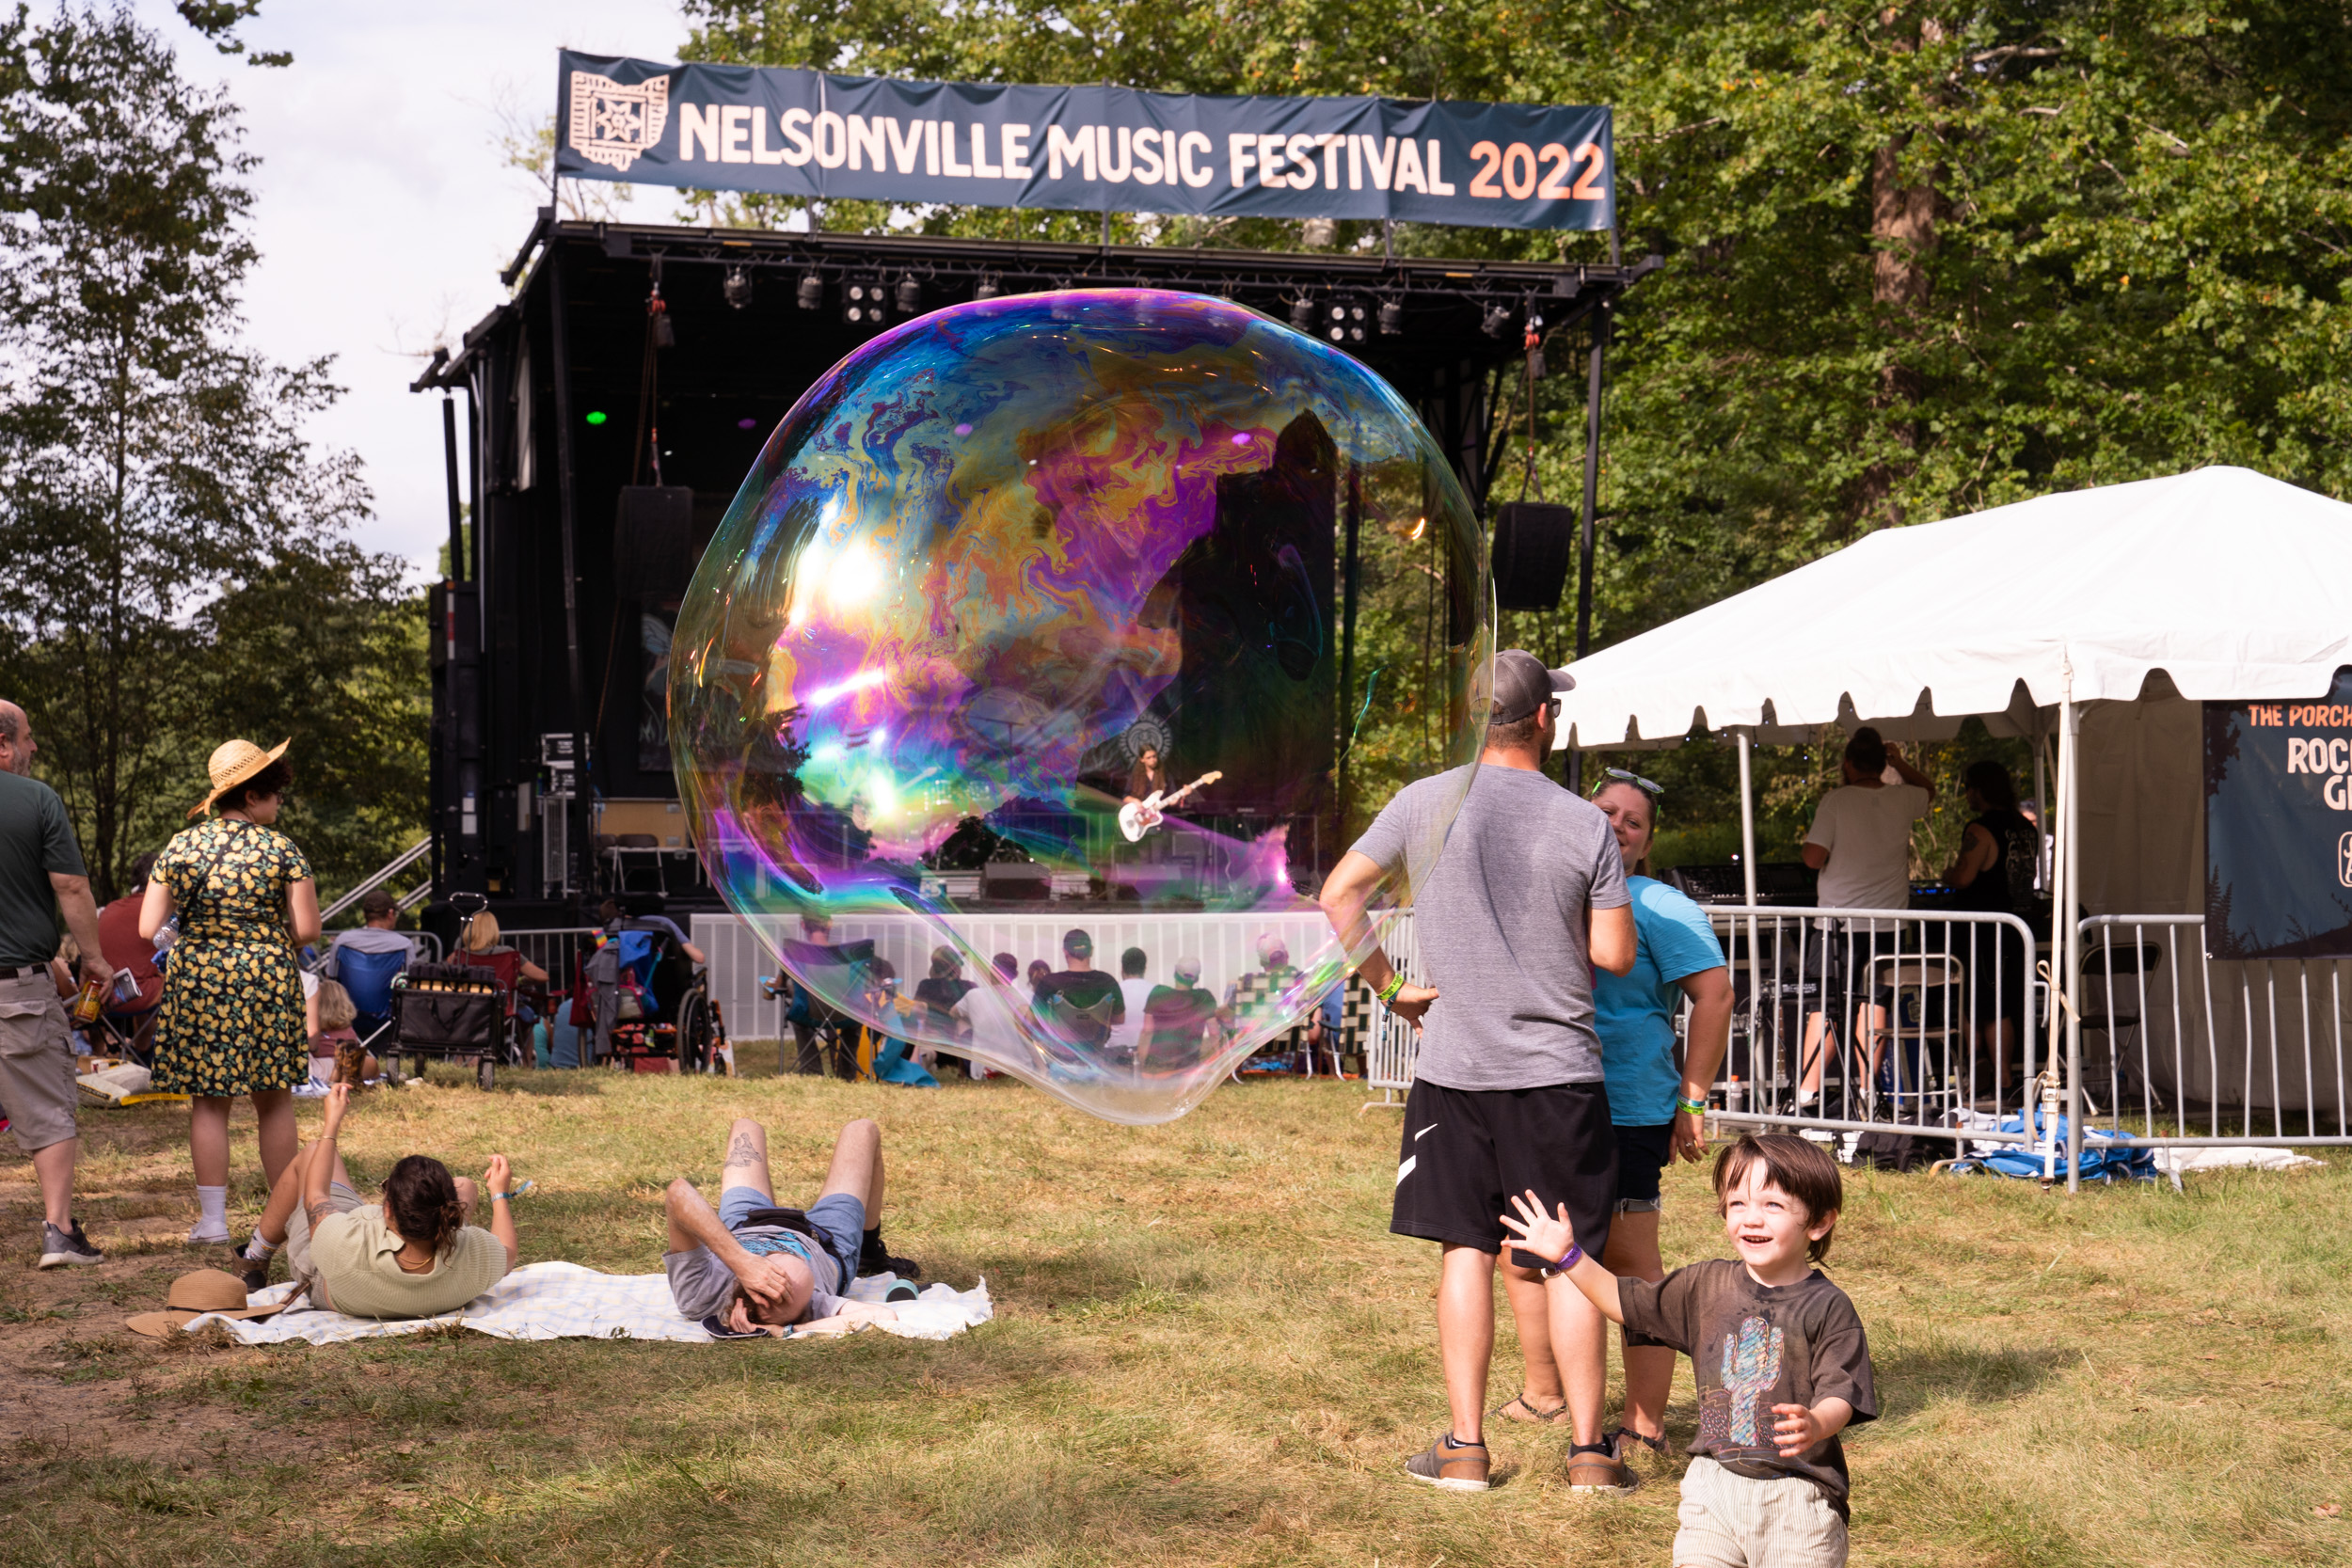 The Nelsonville Music Festival brings familiar sense of community to a